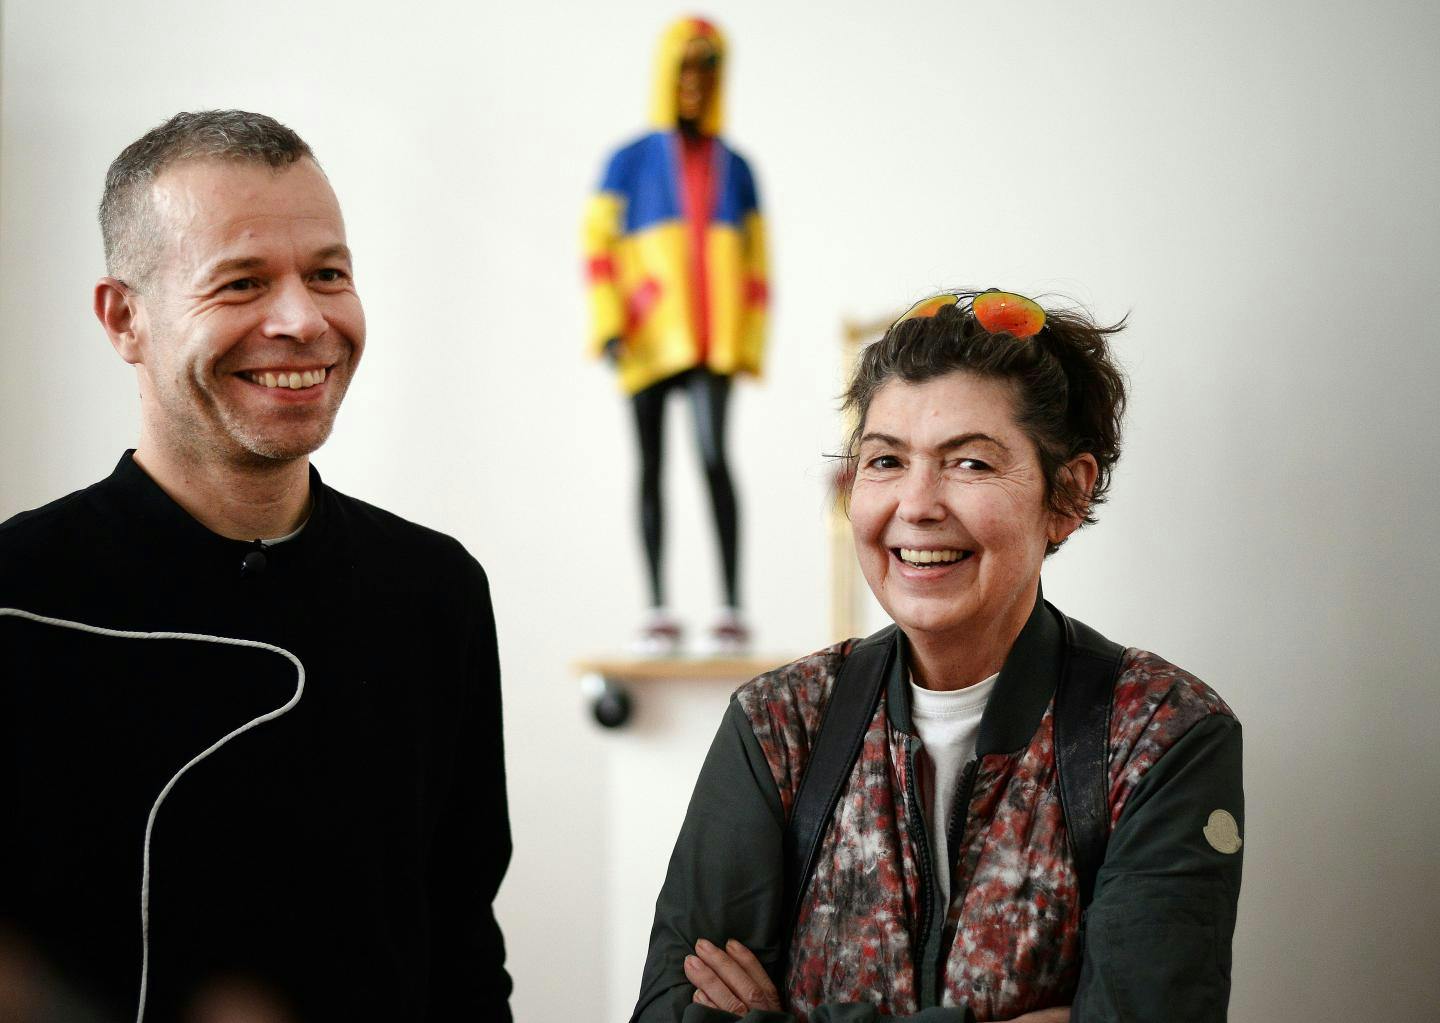 Photograph of Isa Genzken and Wolfgang Tillmans by Jens Kalaene, dated 2016.